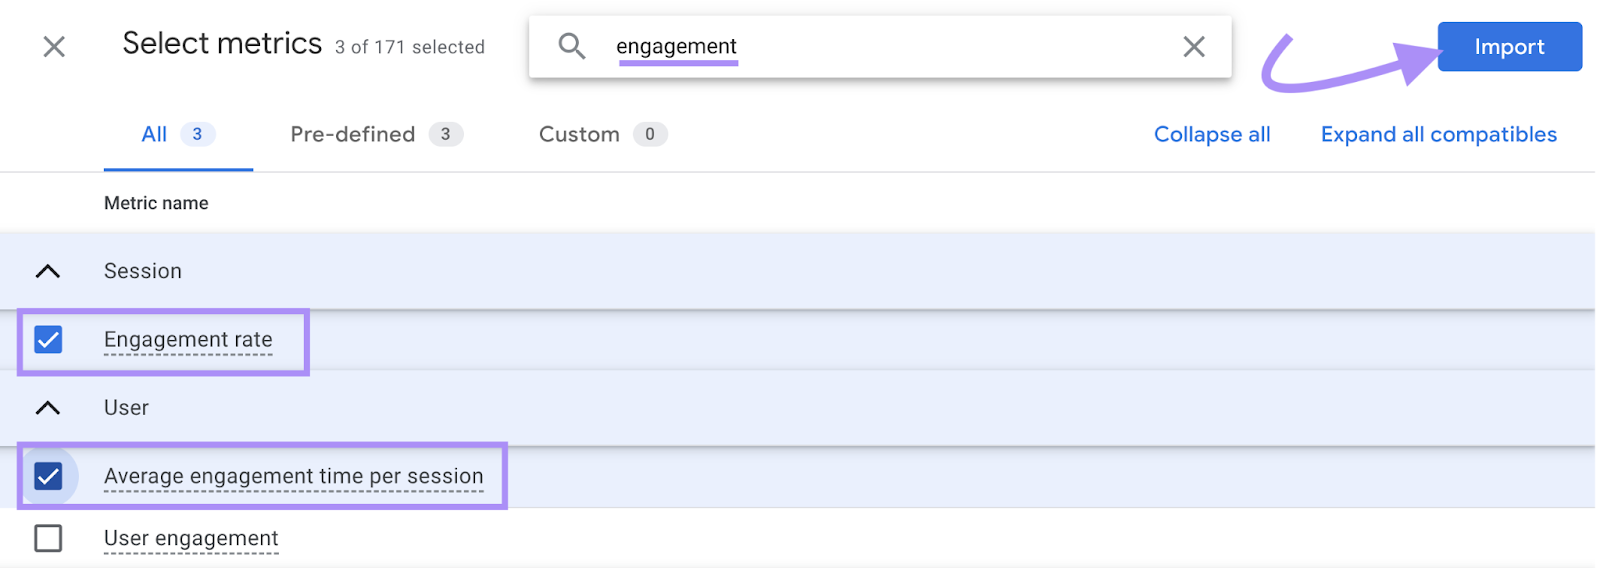 Importing “Engagement rate” and “Average engagement time per session” metrics to the report